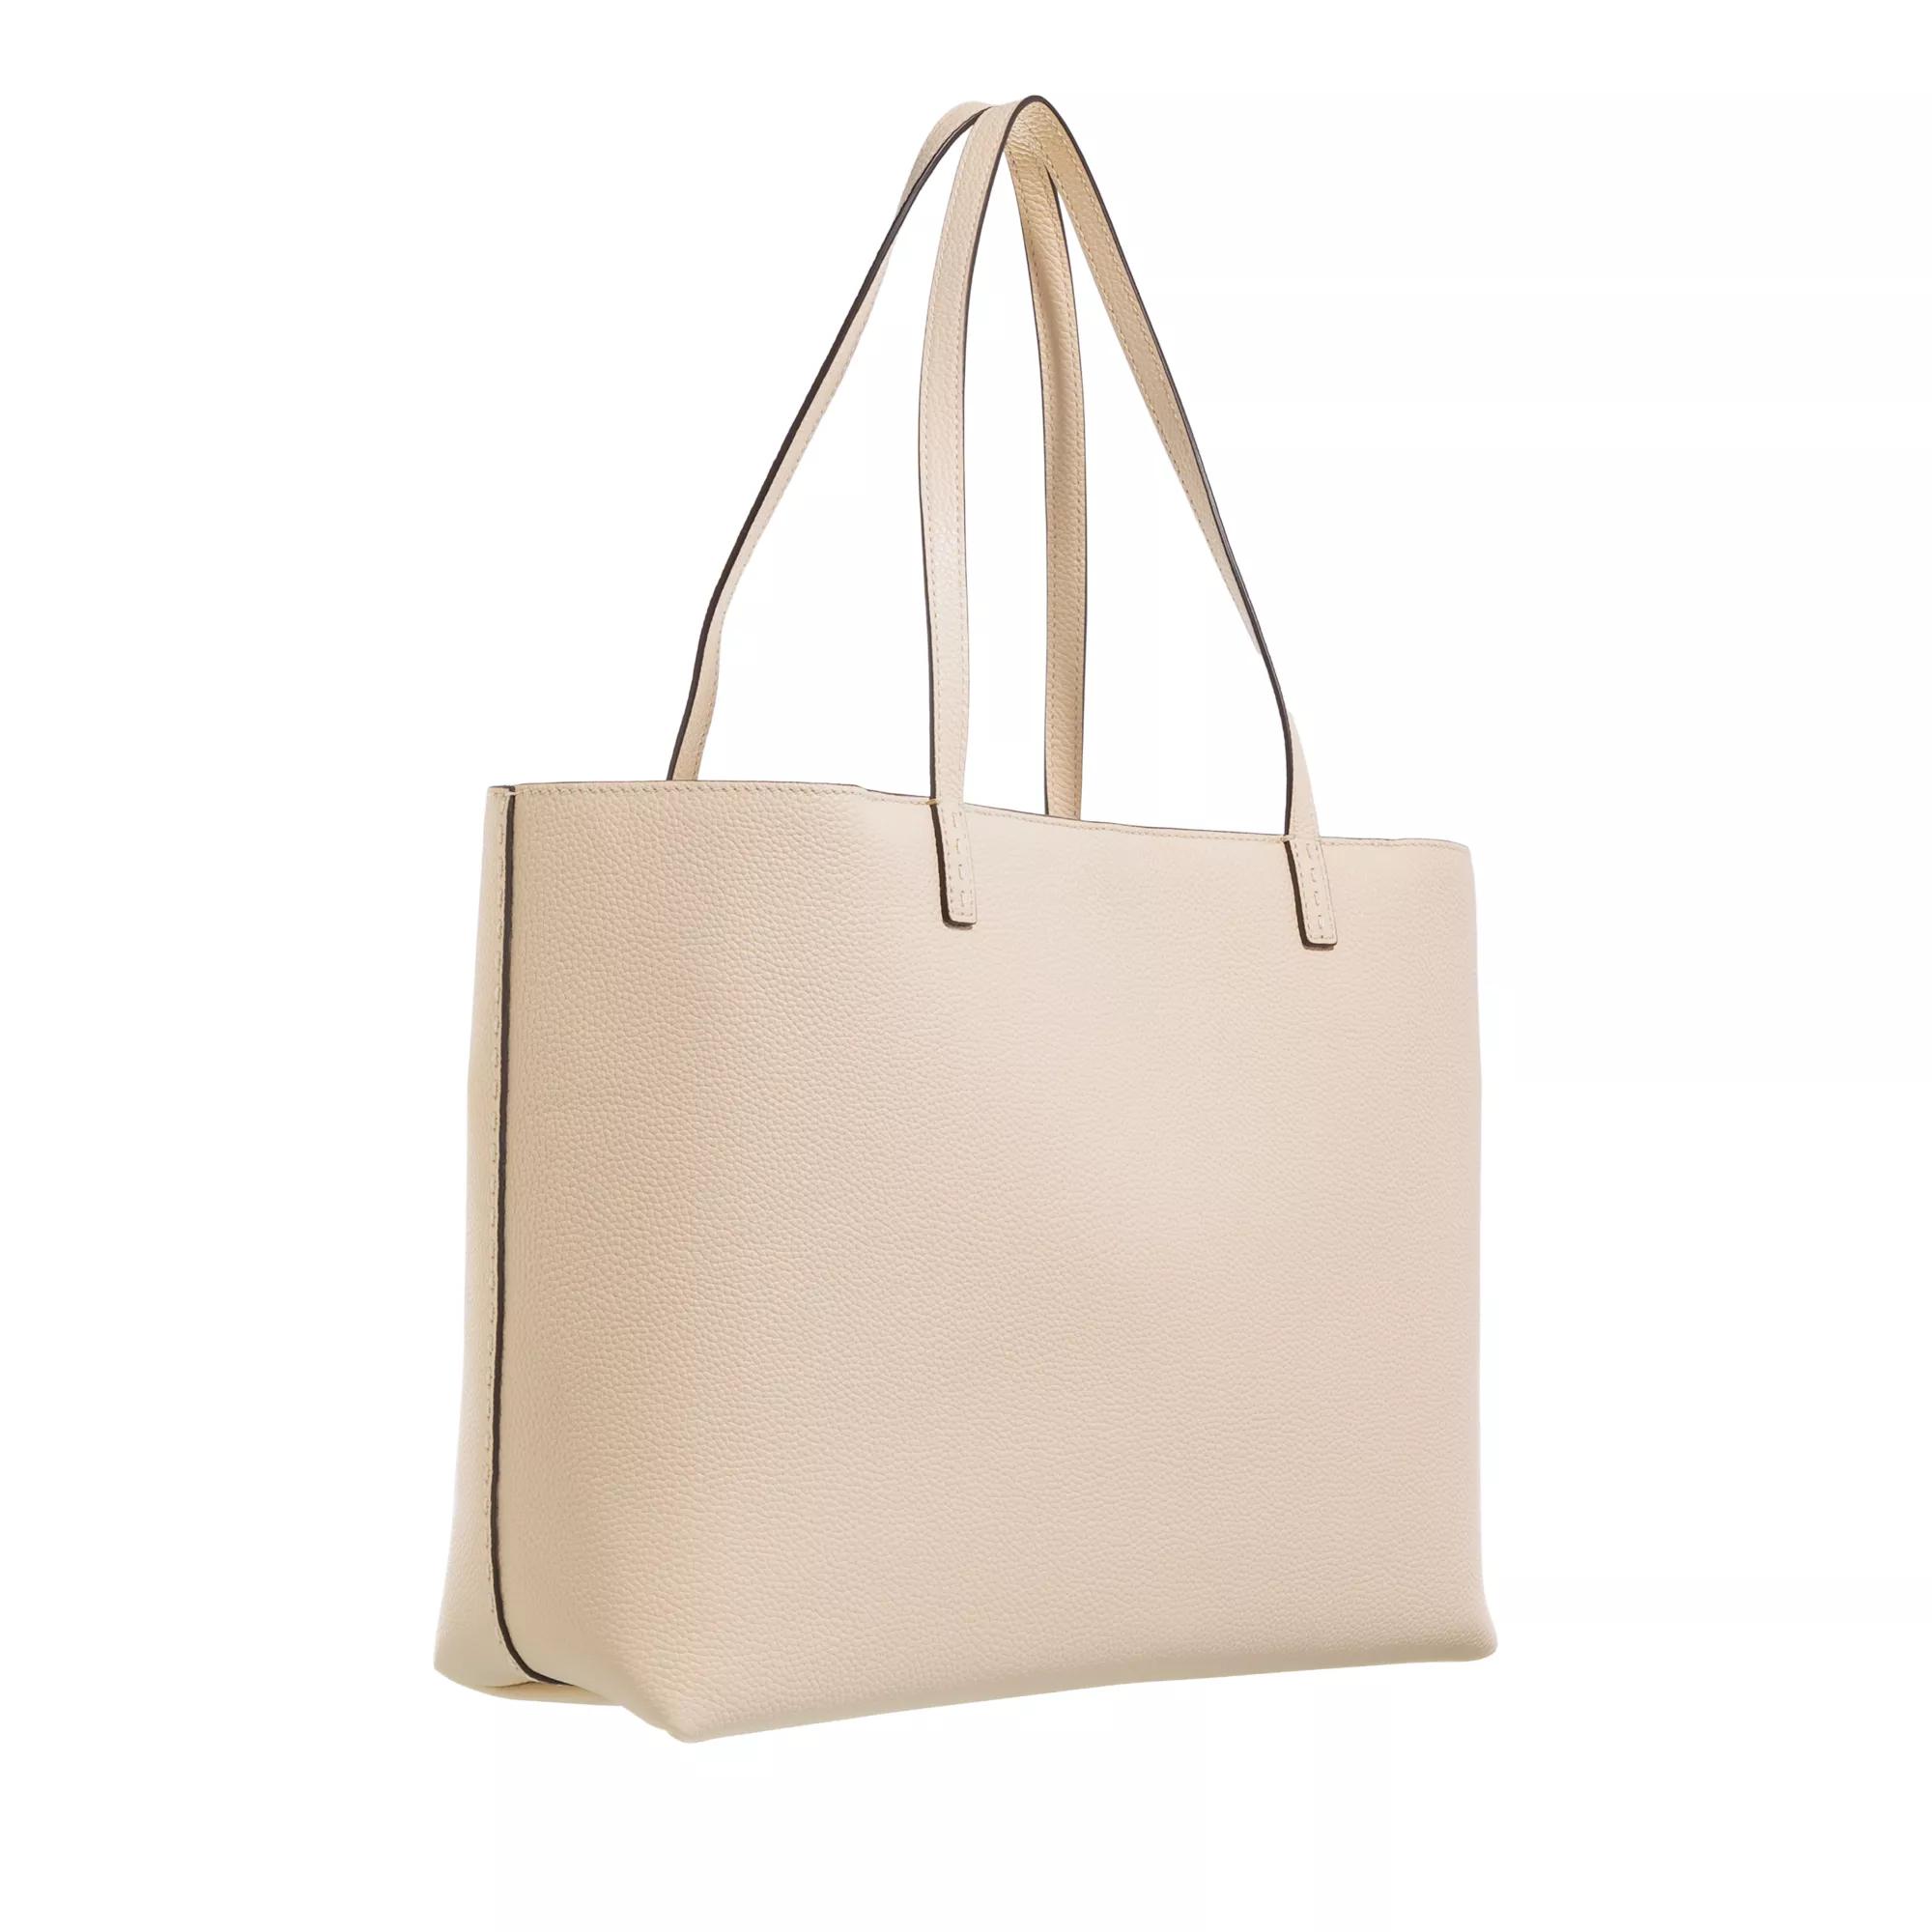 TORY BURCH Shoppers McGraw Tote in beige